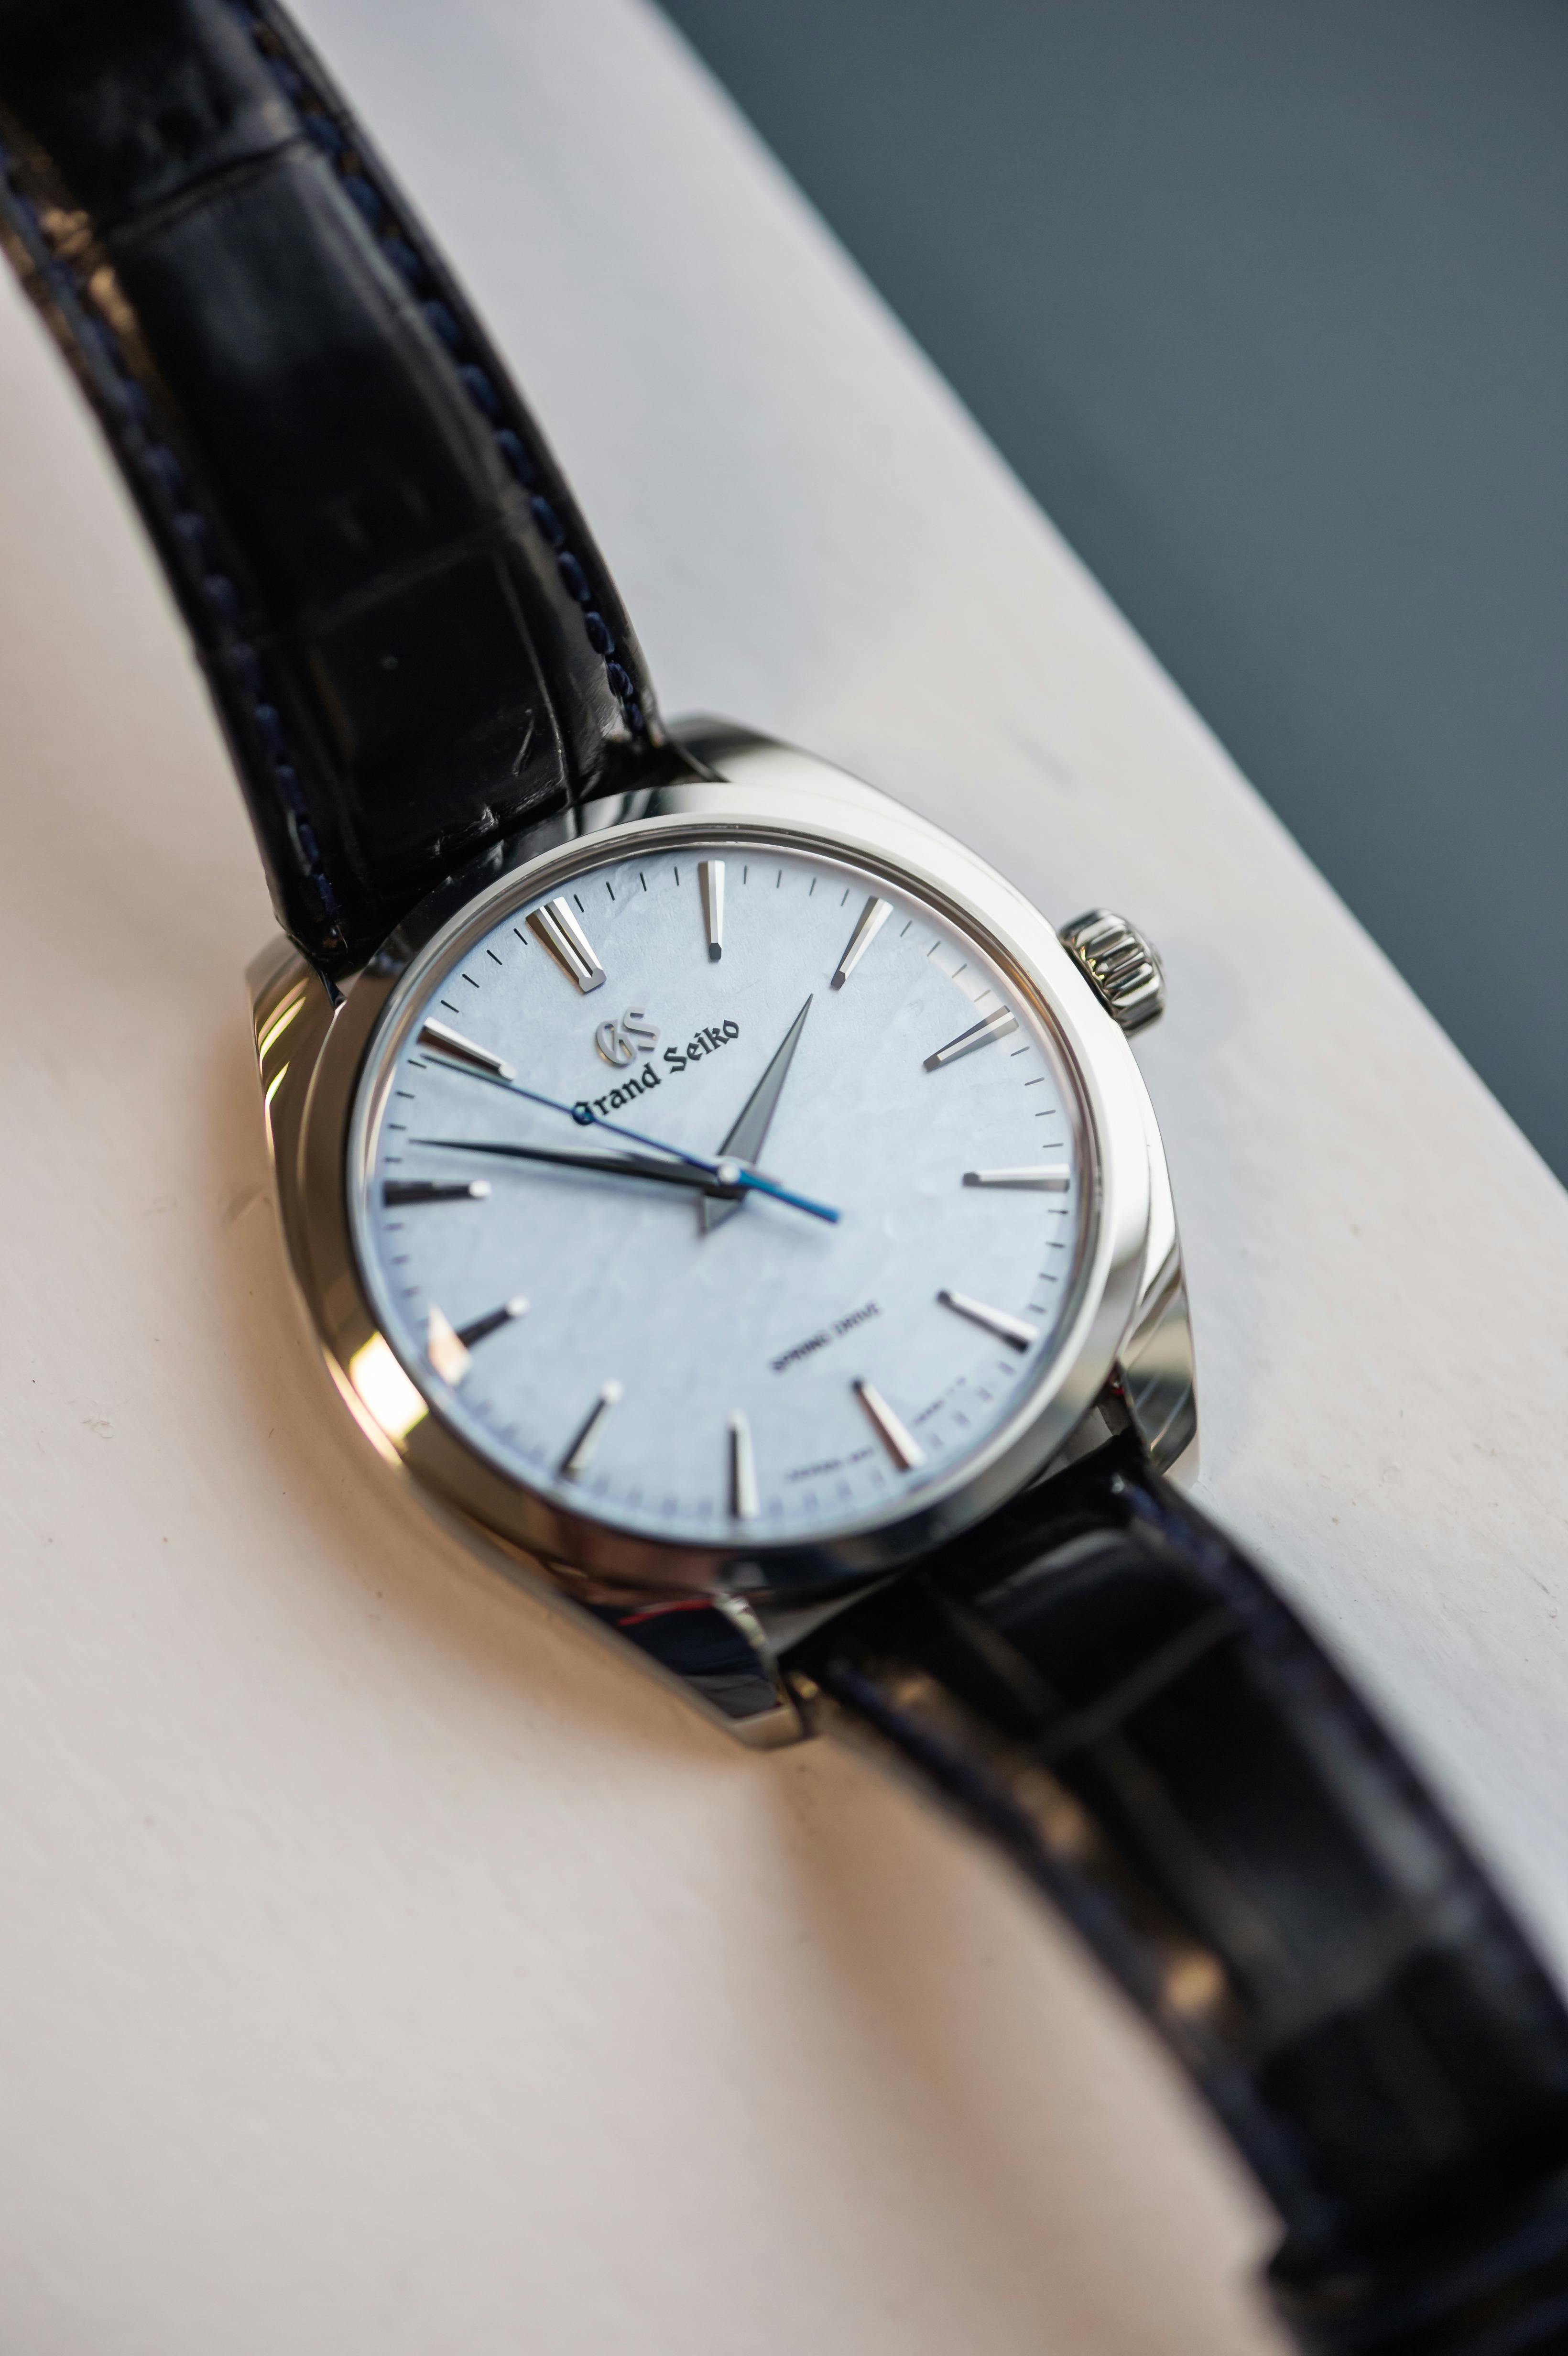 2022 GRAND SEIKO ELEGANCE COLLECTION 'OMIWATARI' for sale by auction in ...